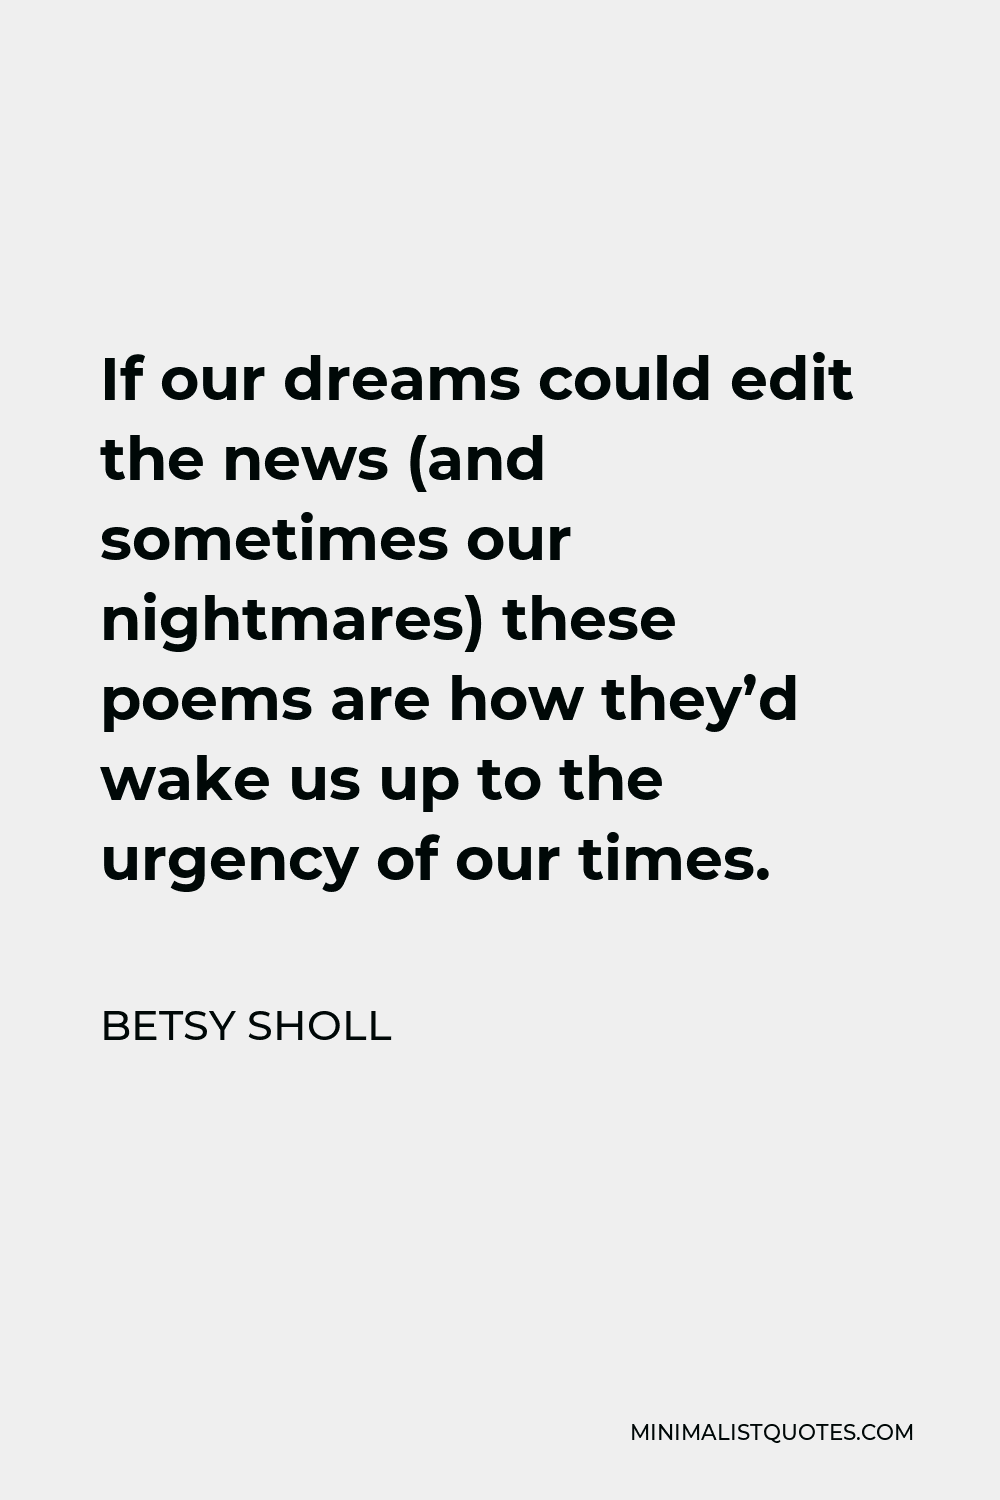 Betsy Sholl Quote - If our dreams could edit the news (and sometimes our nightmares) these poems are how they’d wake us up to the urgency of our times.